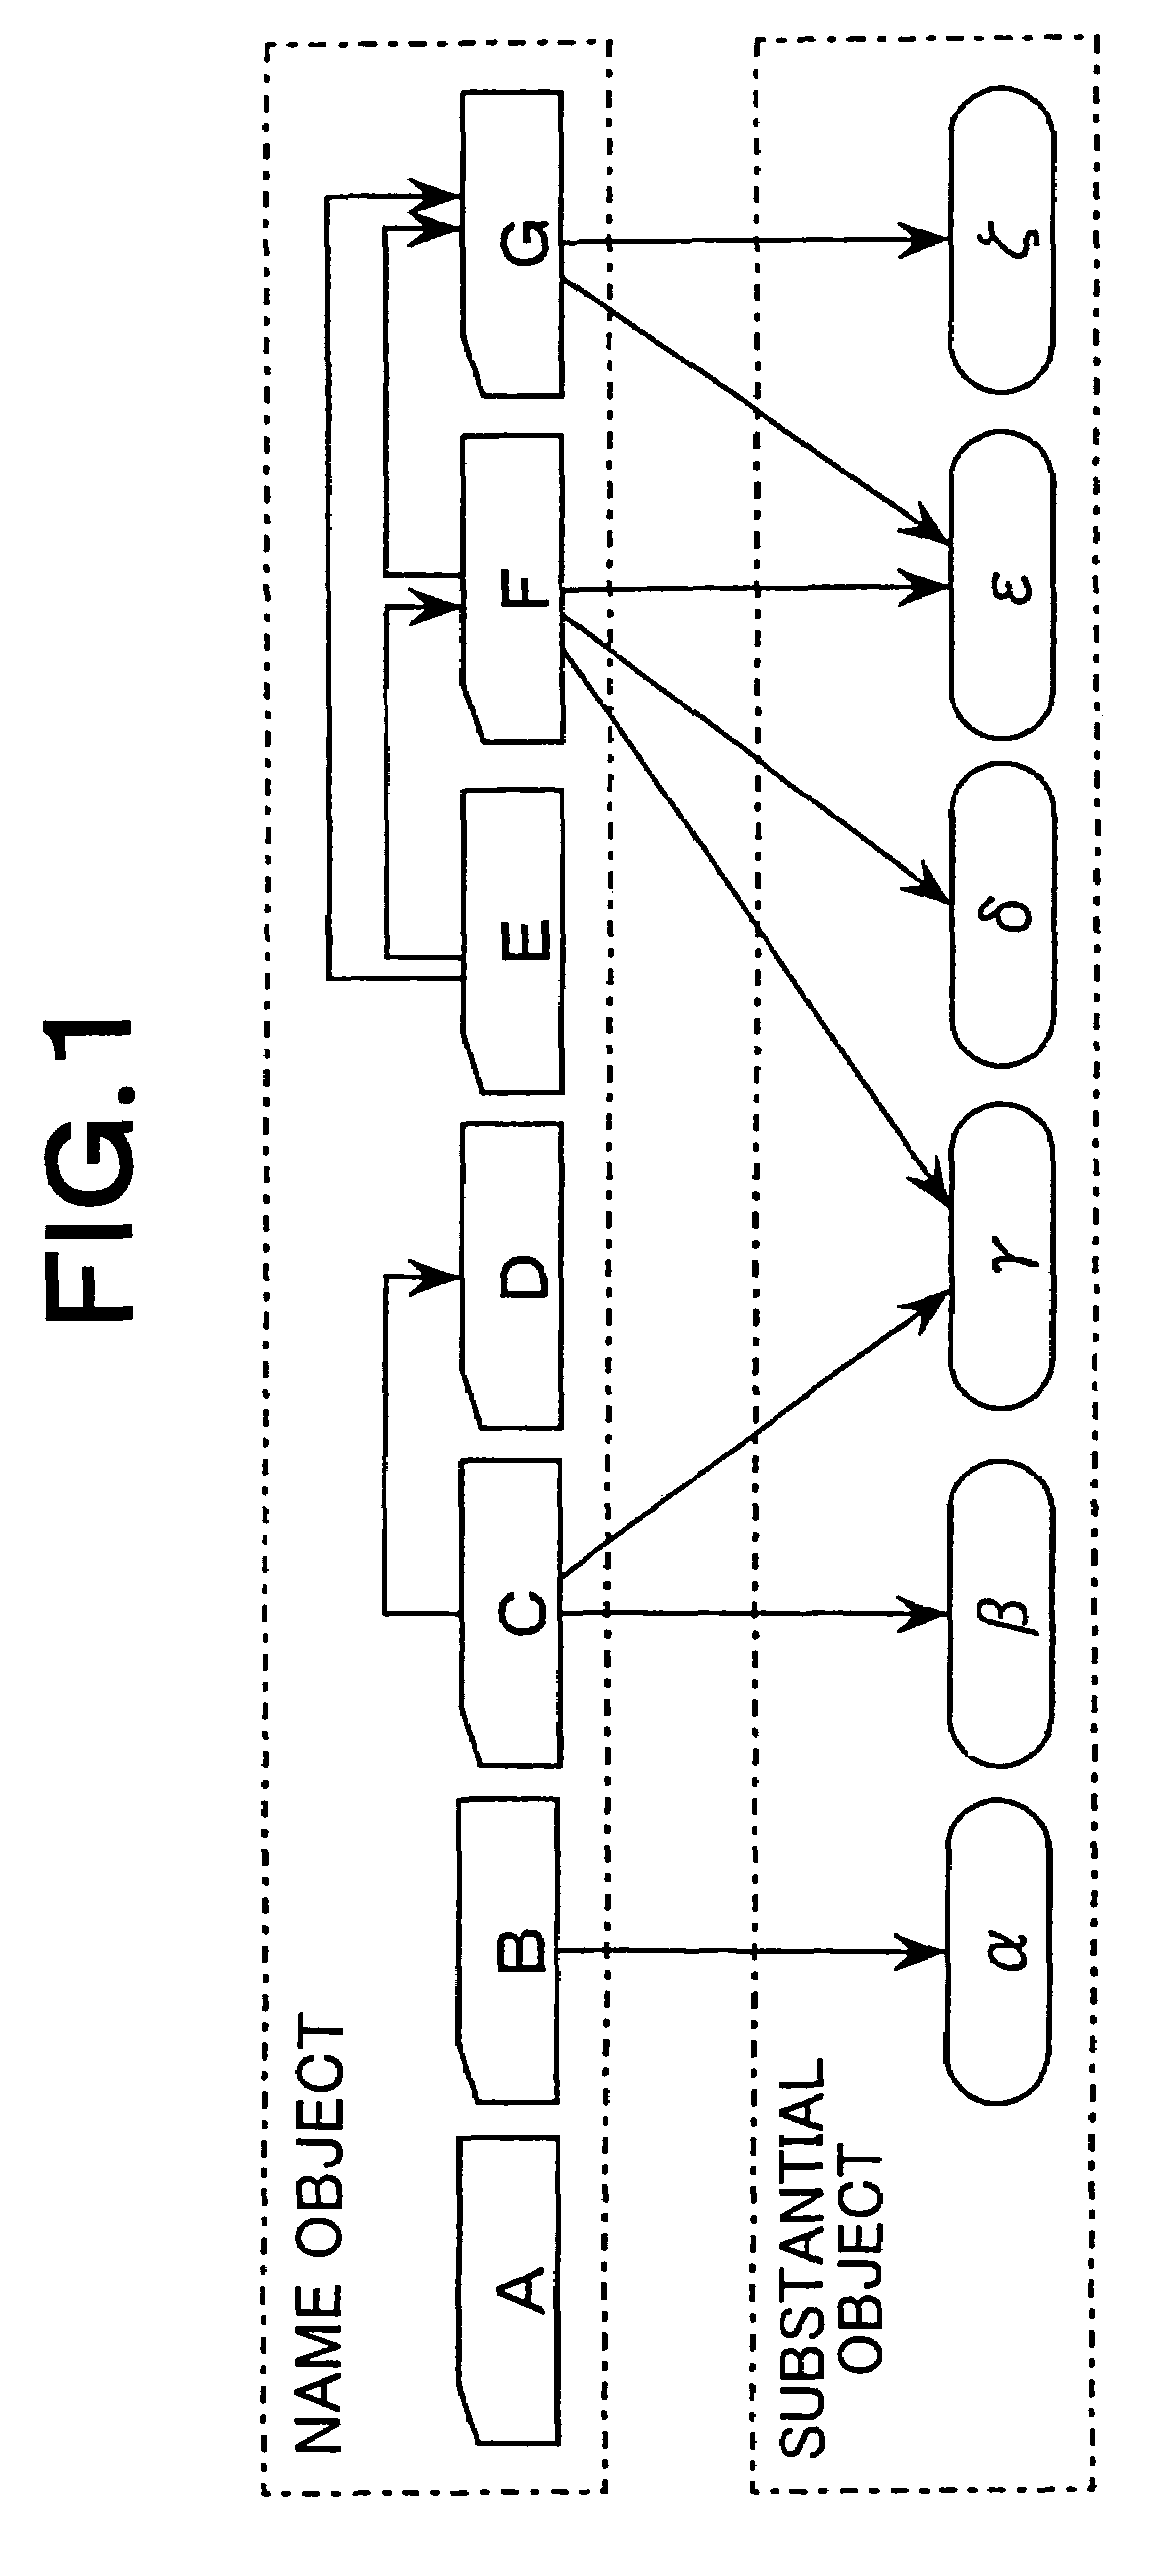 Access control system, access control method, and access control program